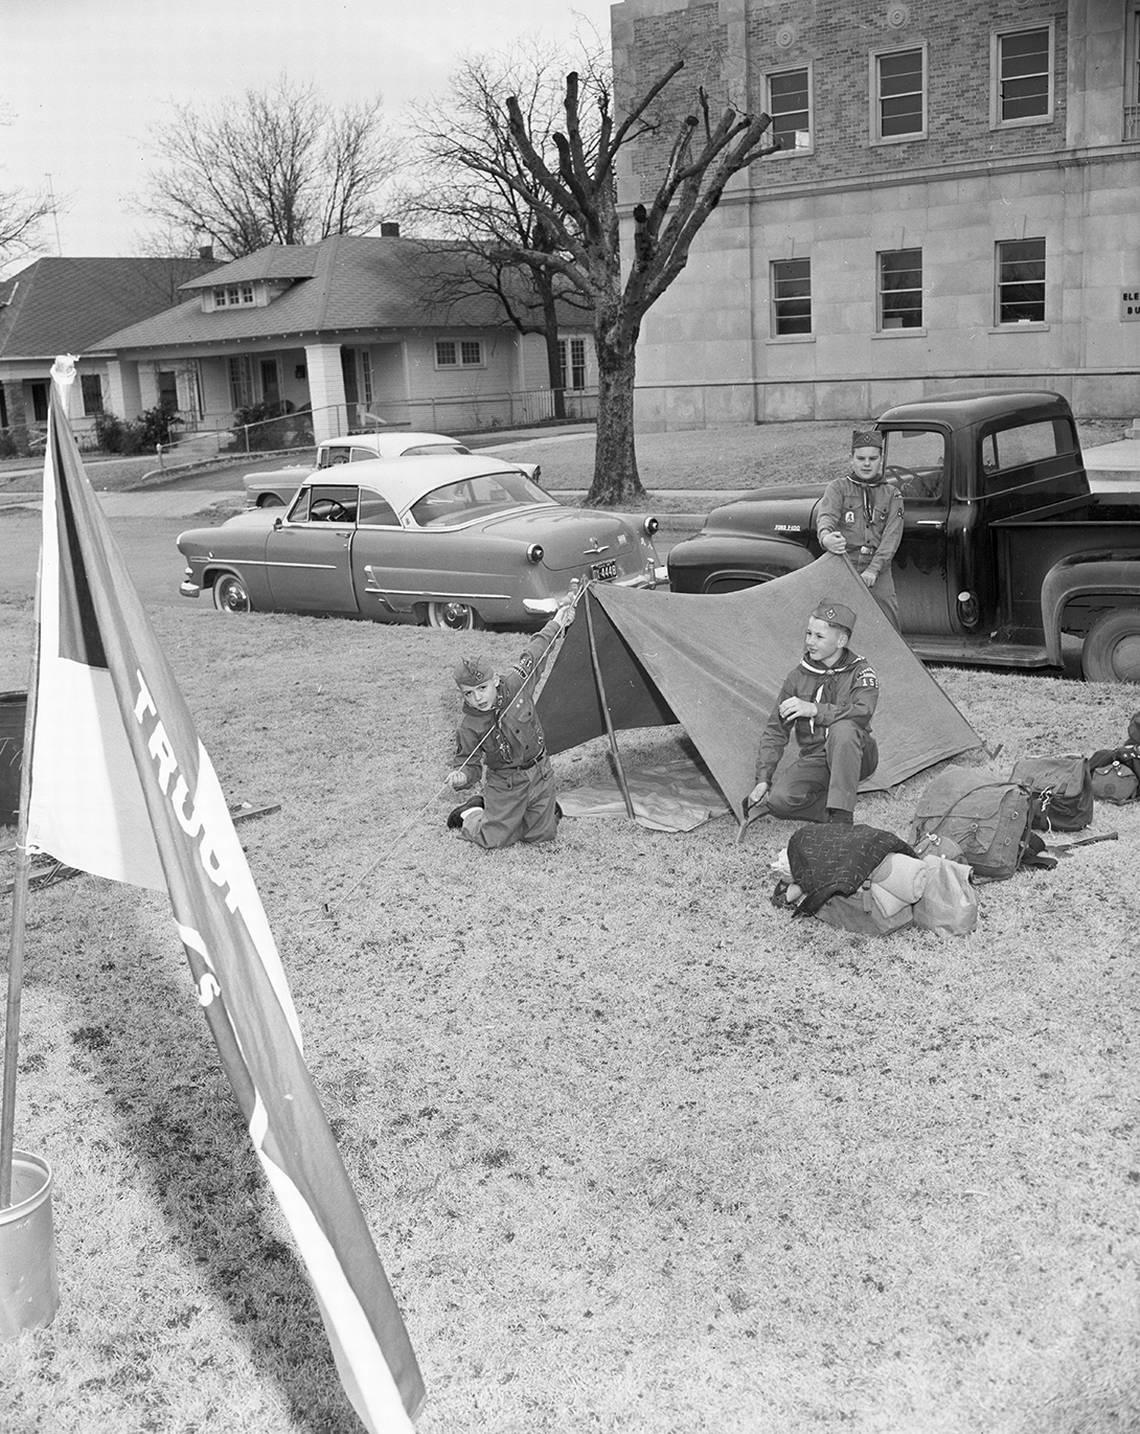 Feb. 7, 1959: Starting off Boy Scout week on Saturday by exhibiting camping skills, three scouts pitch a tent on the parkway of Circle Park Boulevard. They are, left to right, Joe Moore of 2902 North West 26th, Roy Messick of 2717 North West 31st and Eugene Johnson of 2817 North West 29th. Fort Worth Star-Telegram archive/UT Arlington Special Collections